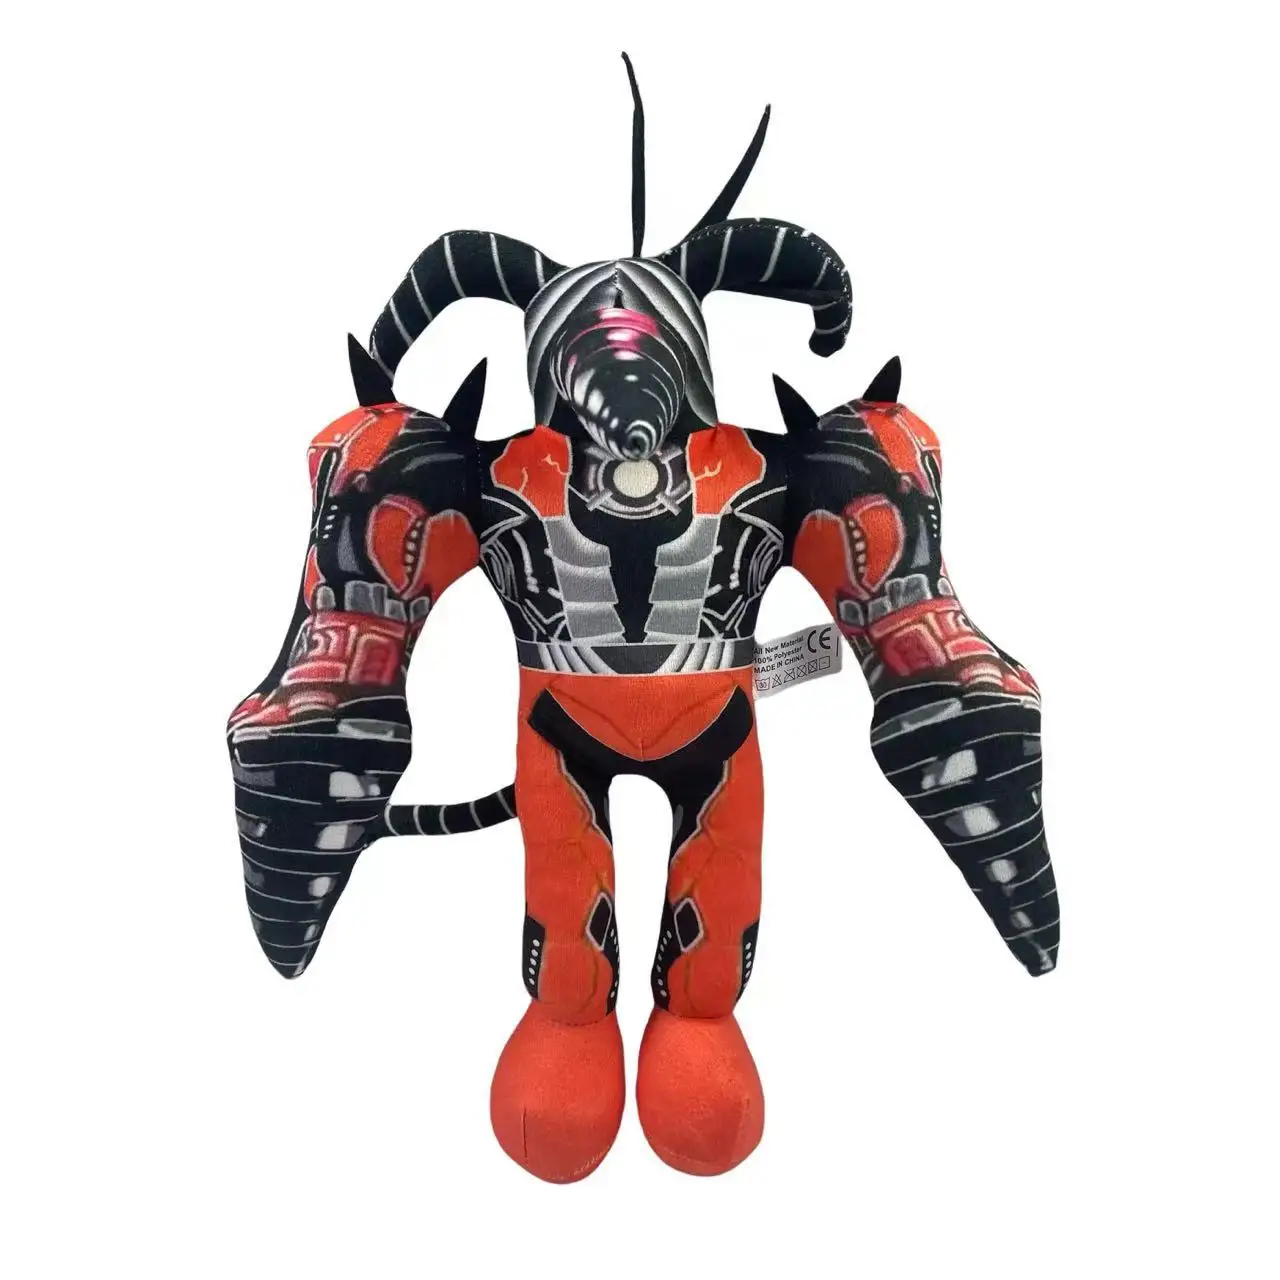 Cross-border New Skibidi Toilet Plush Toilet People Spoof Plush Toy Bull Devil Electric Drill Doll stuffed animals babycham toy figurine for young people plush toys built in fragrant beads